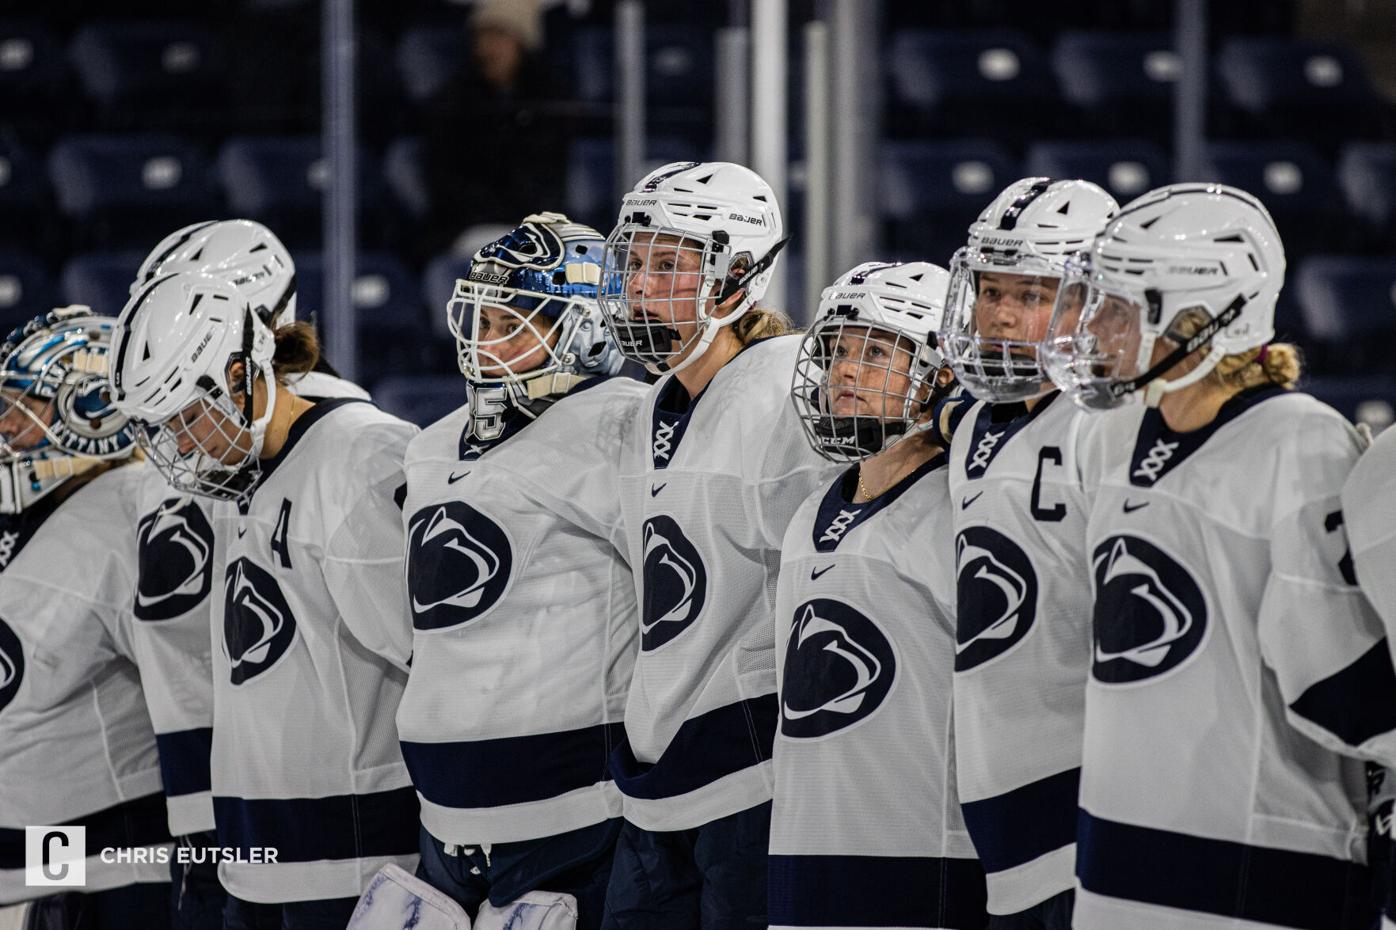 Penn State Men's Hockey Stays Put At No. 6 In Latest USCHO Poll